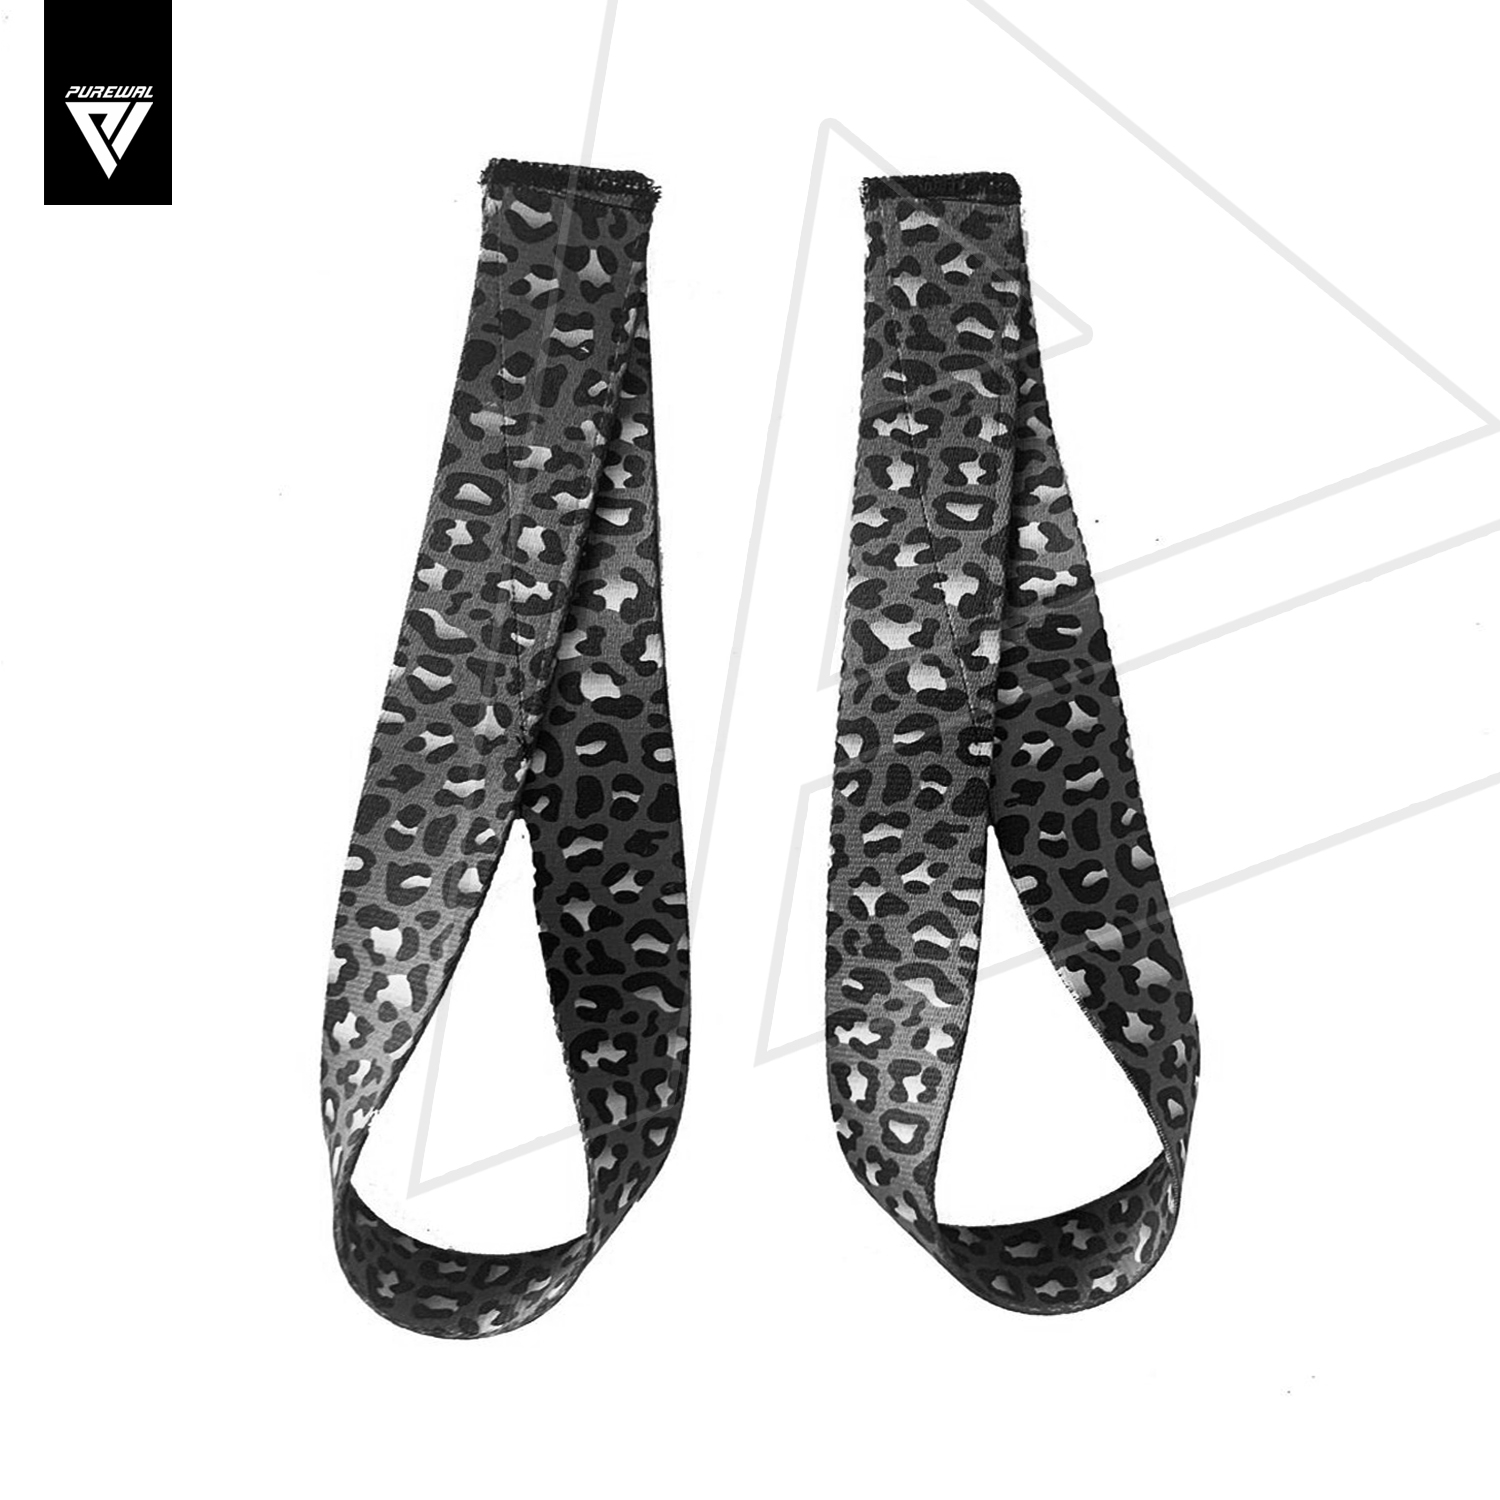 Olympic Lifting Straps - Leopard